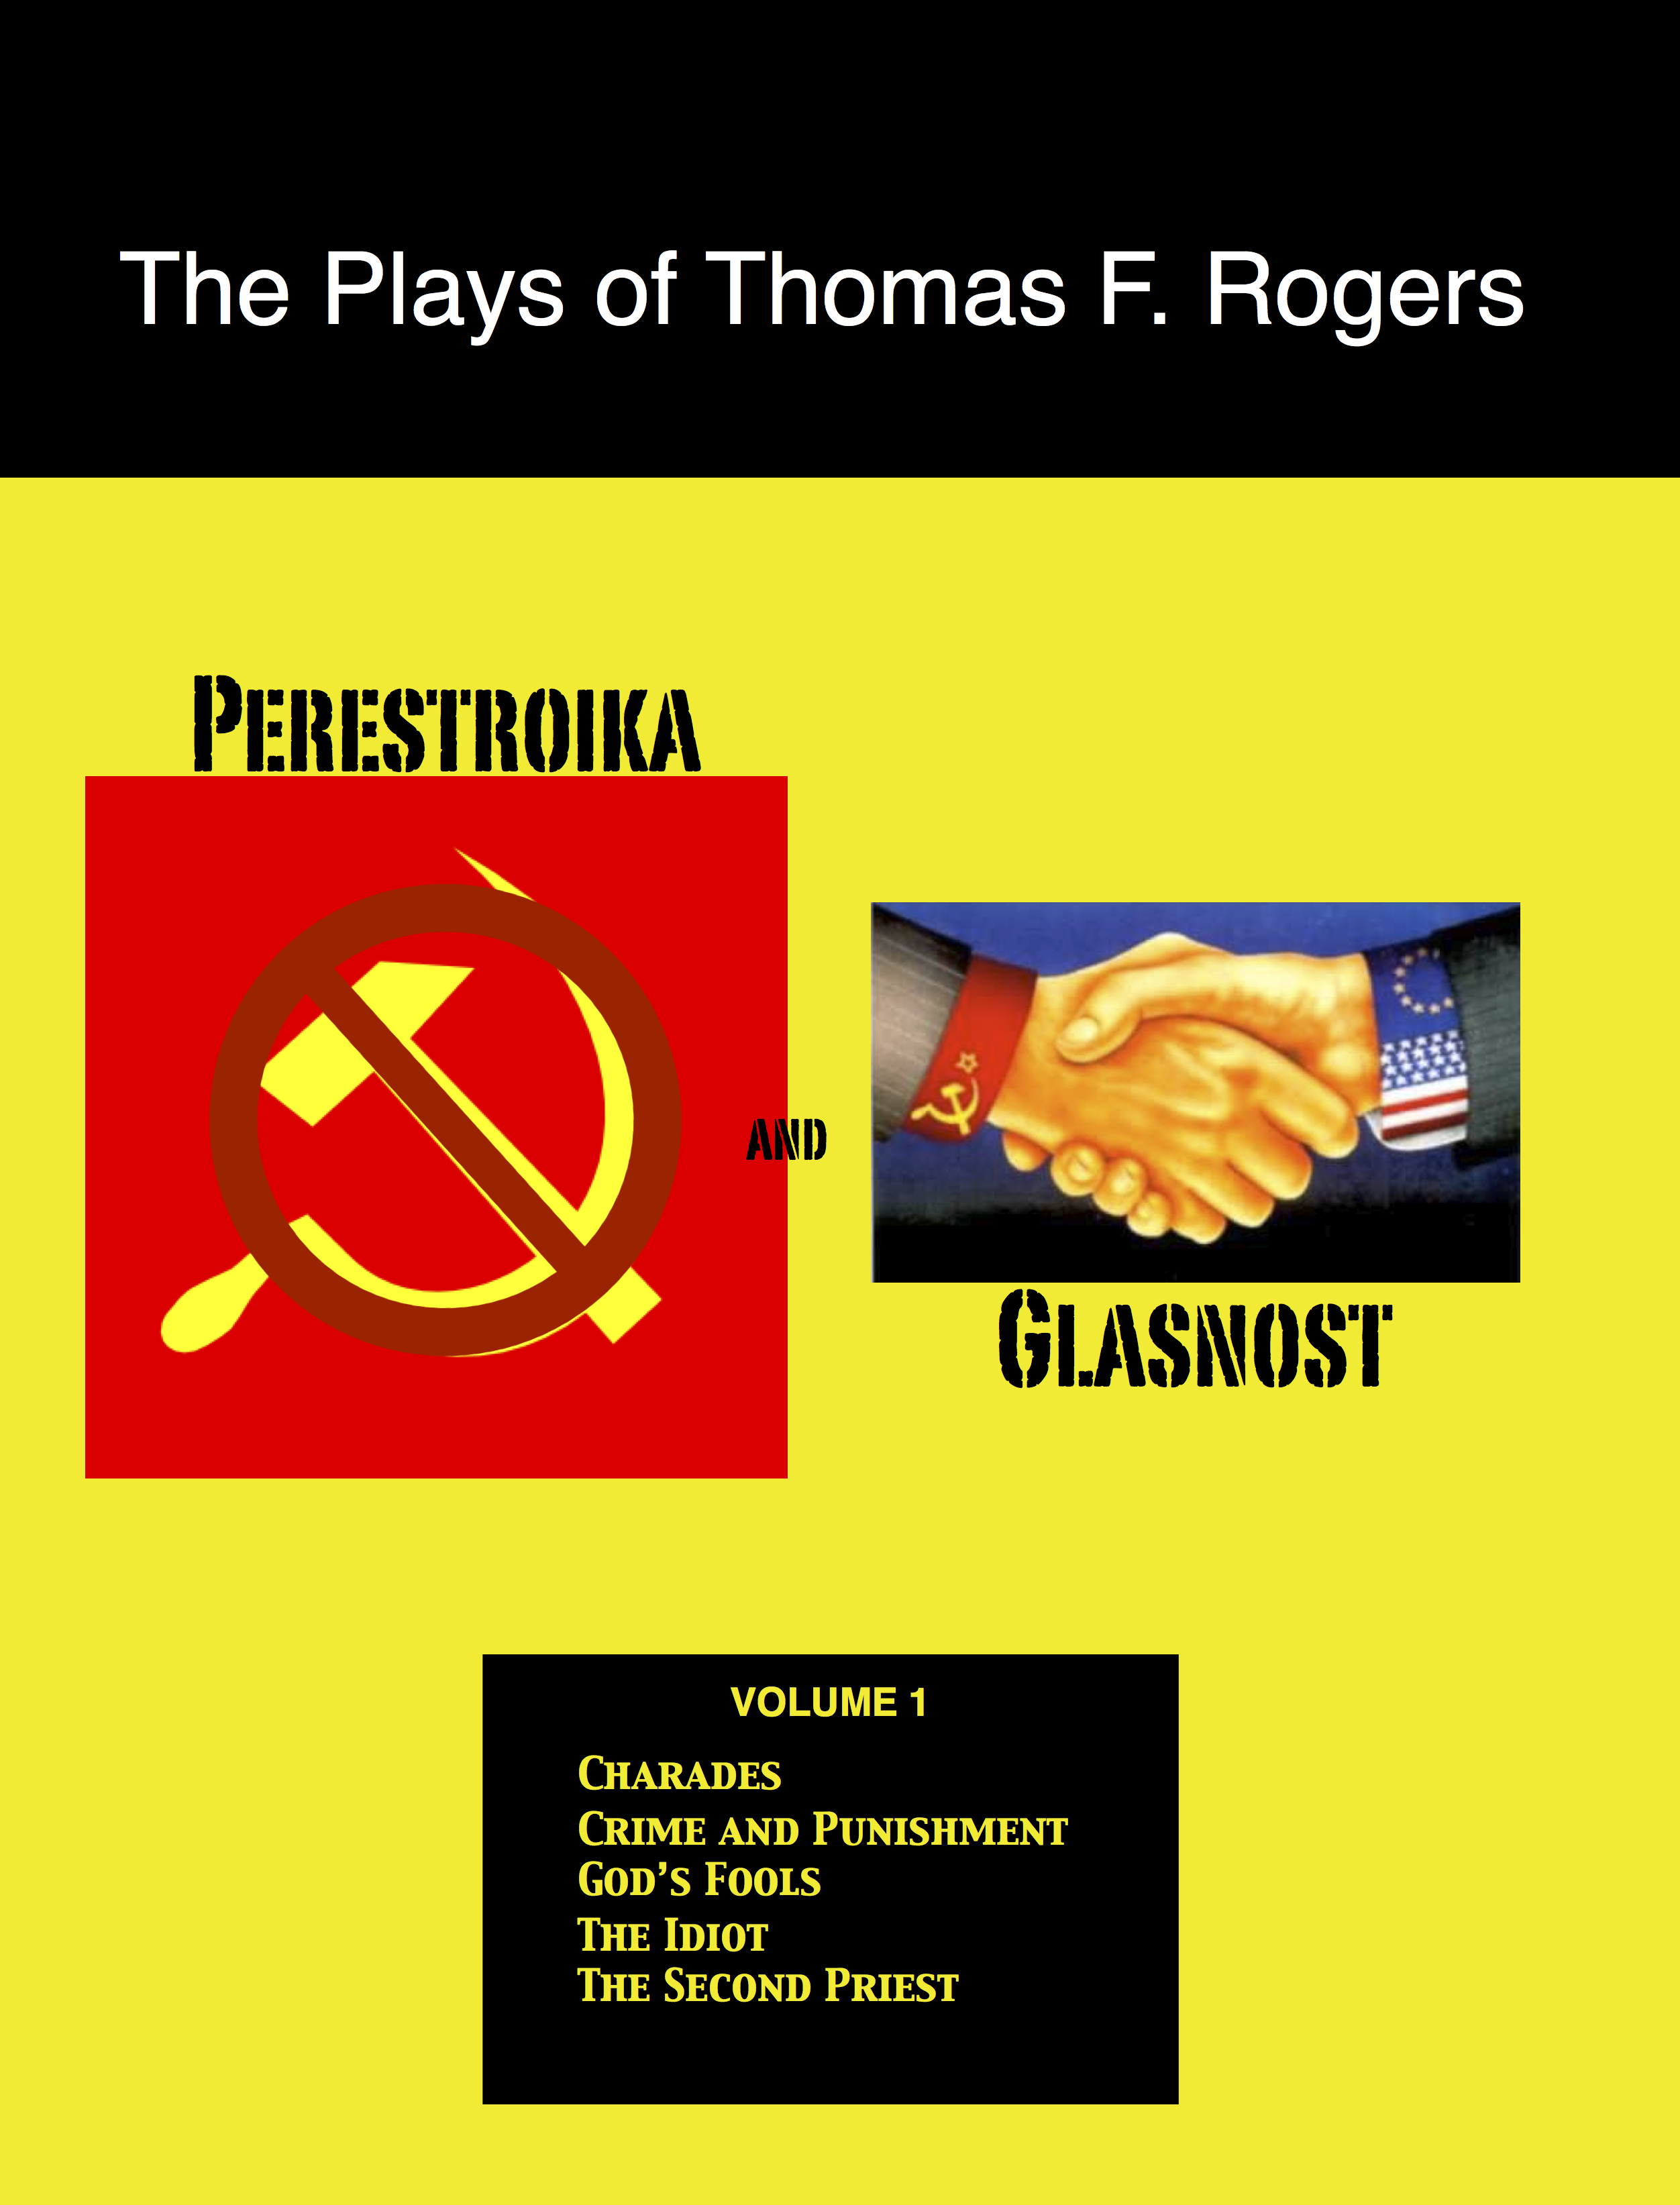 The Plays of Thomas F. Rogers Volume 1: Perestroika and Glasnost